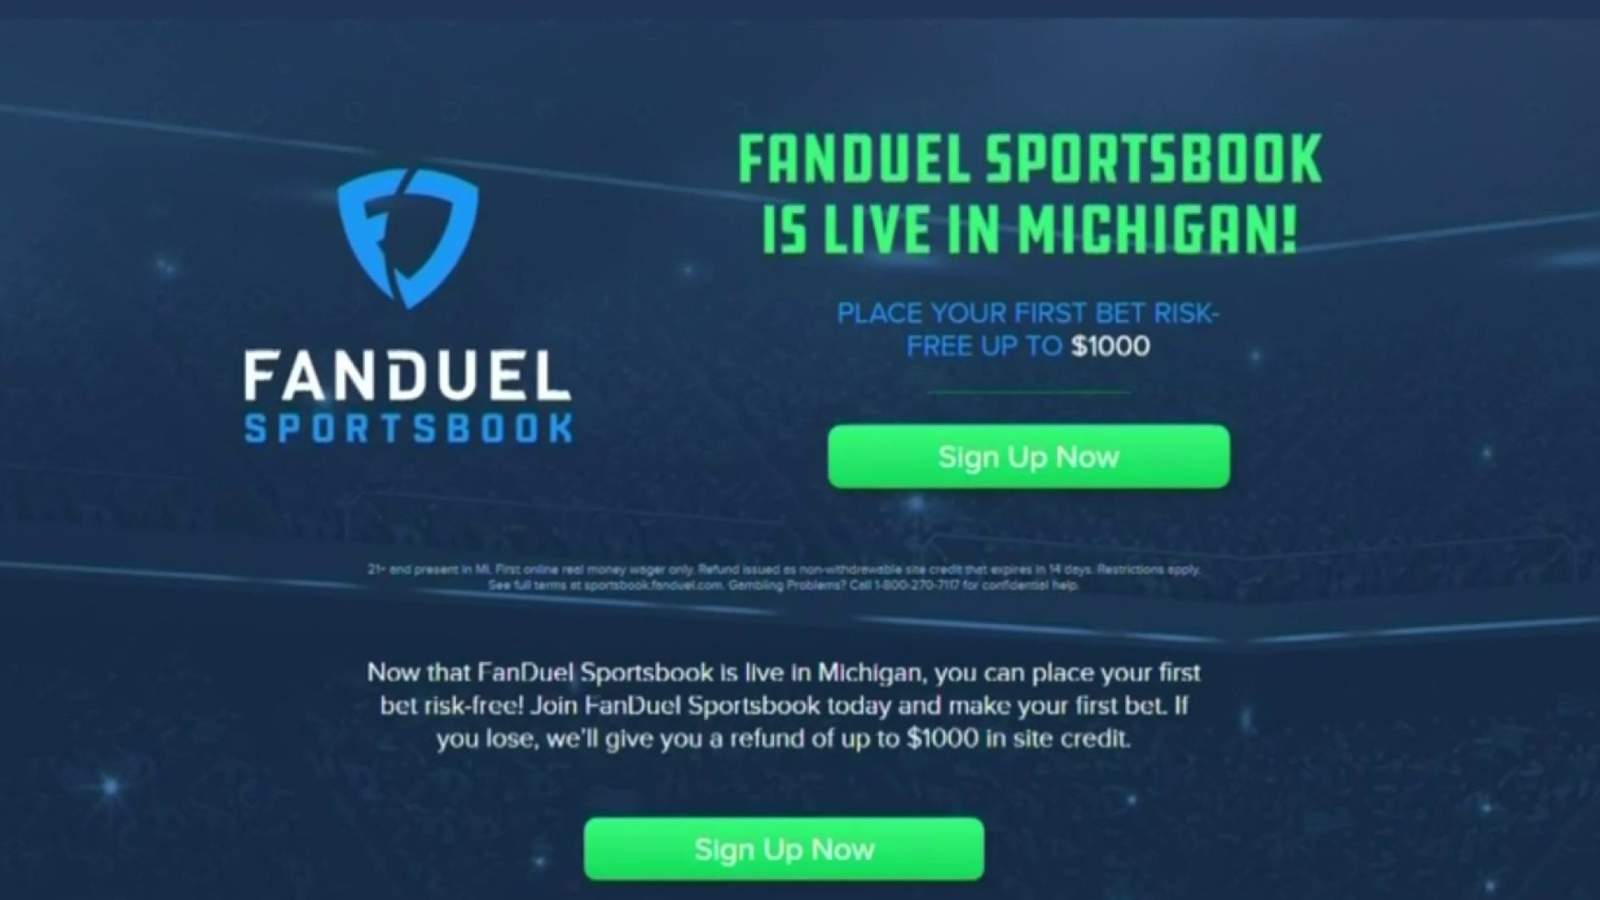 Online gambling and sports betting goes live in Michigan